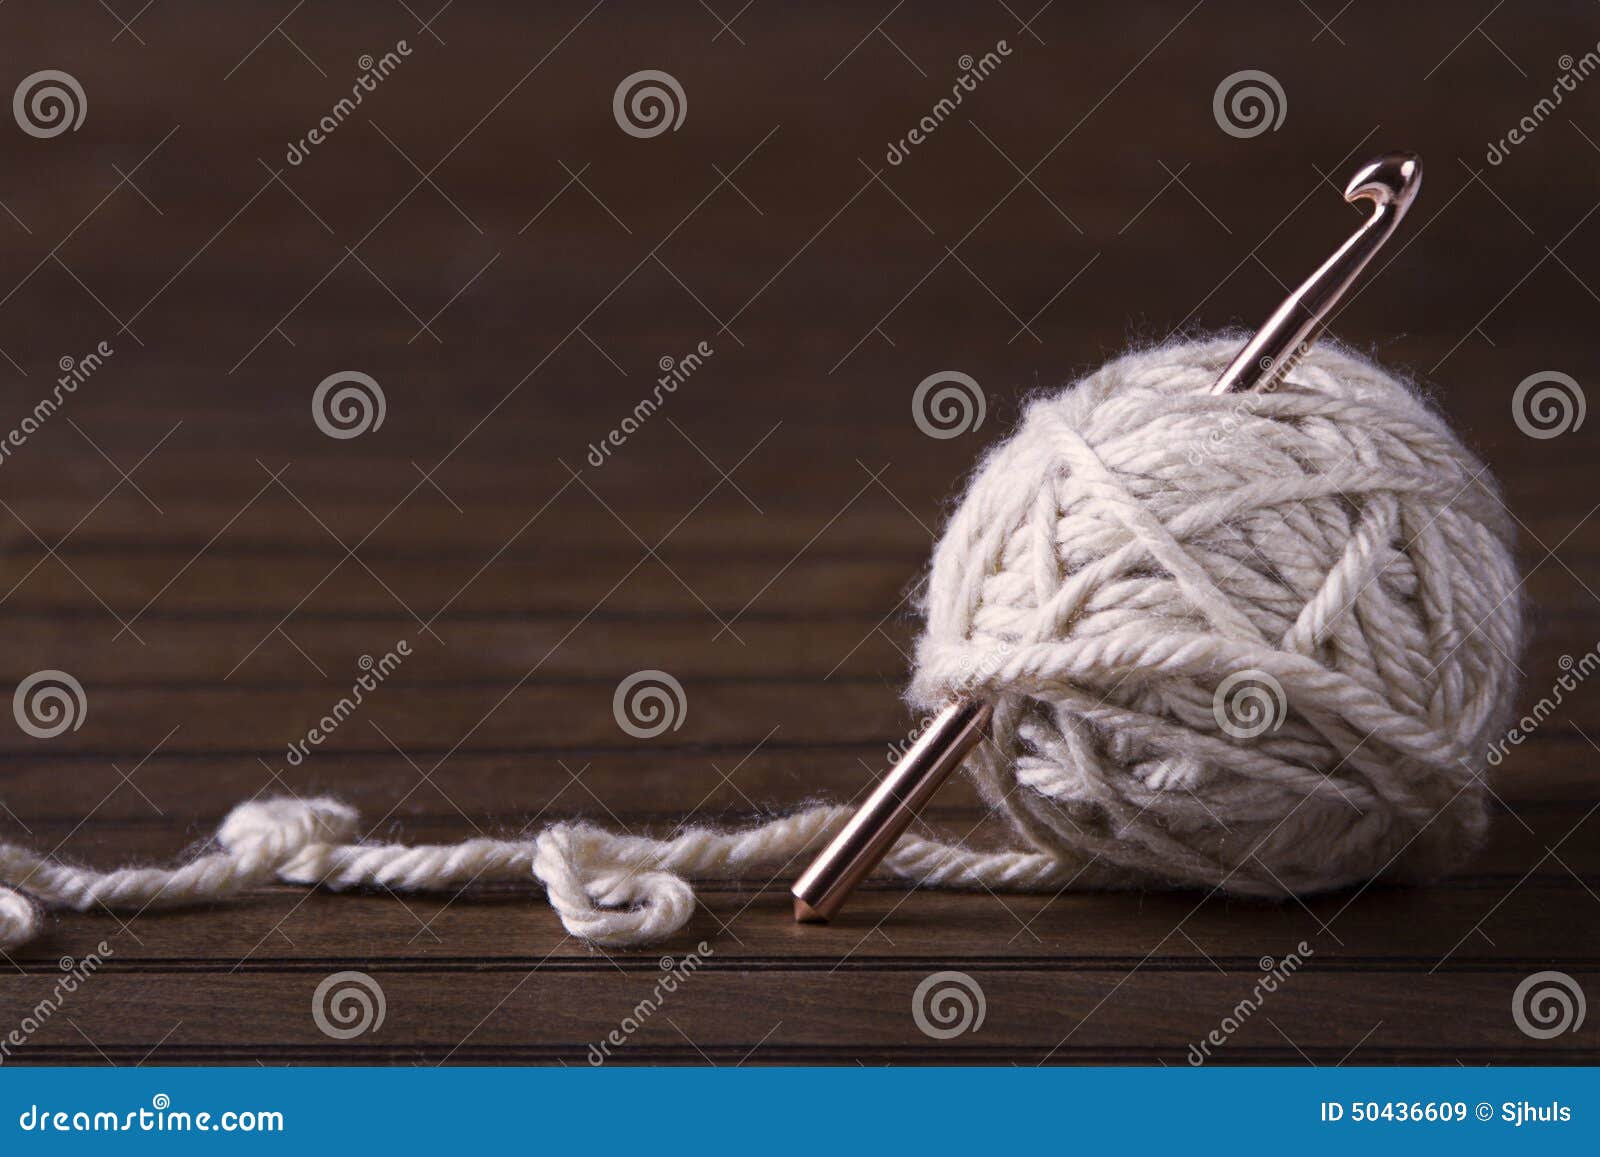 Crochet yarn, scissors and a ball of yarn on a bed · Free Stock Photo